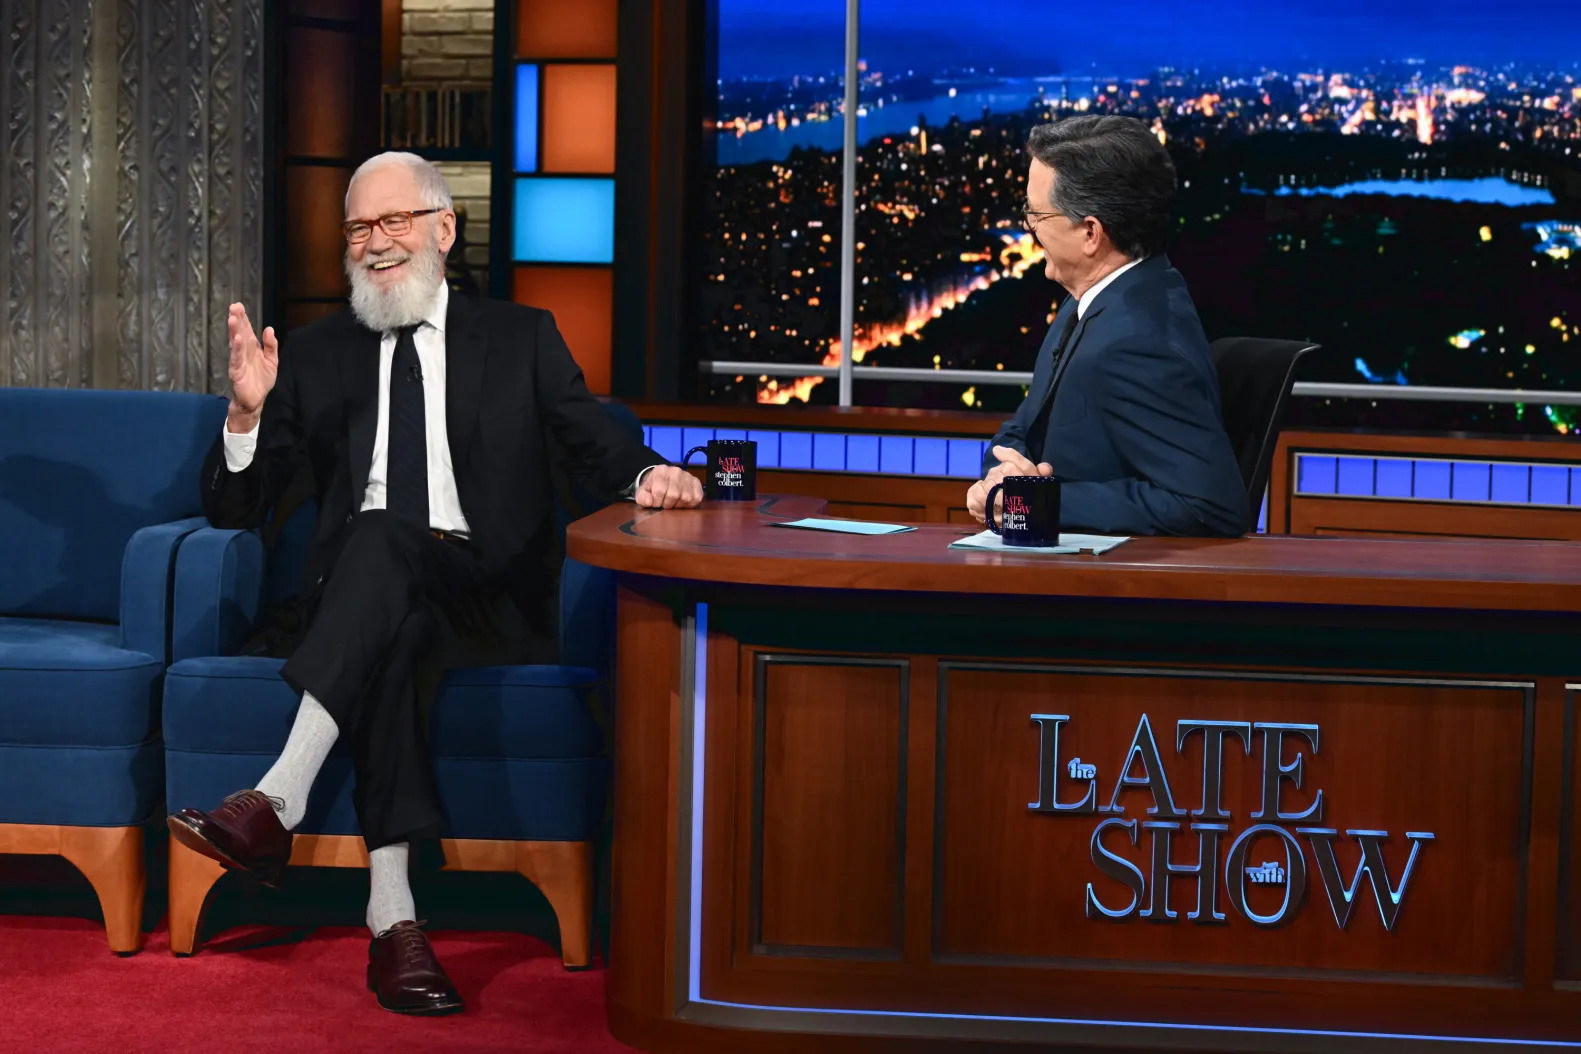 David Letterman on The Late Show with Stephen Colbert | CBS